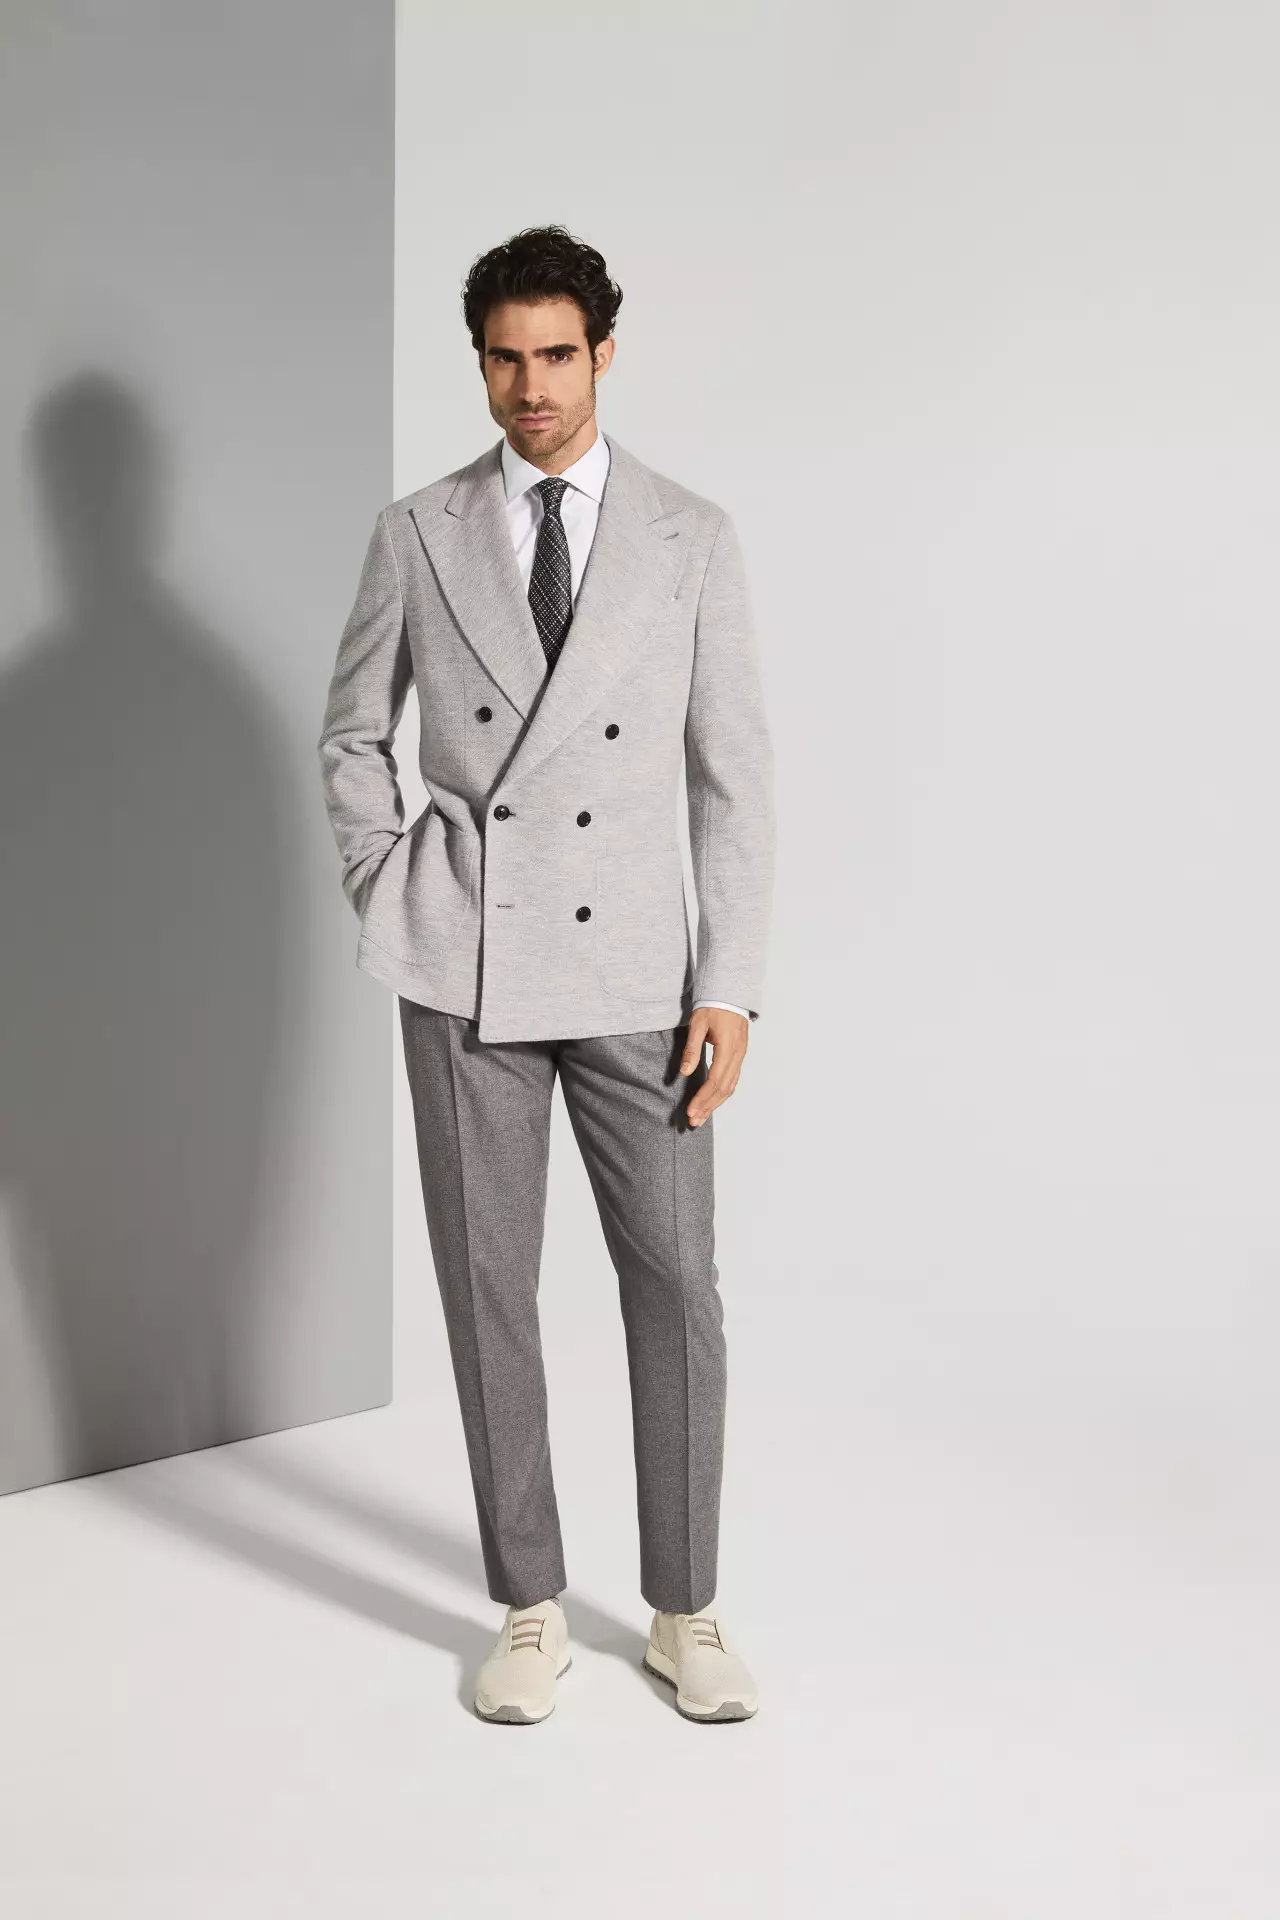 The Looks of Canali Outono/Inverno 2020 Florencia 40185_17